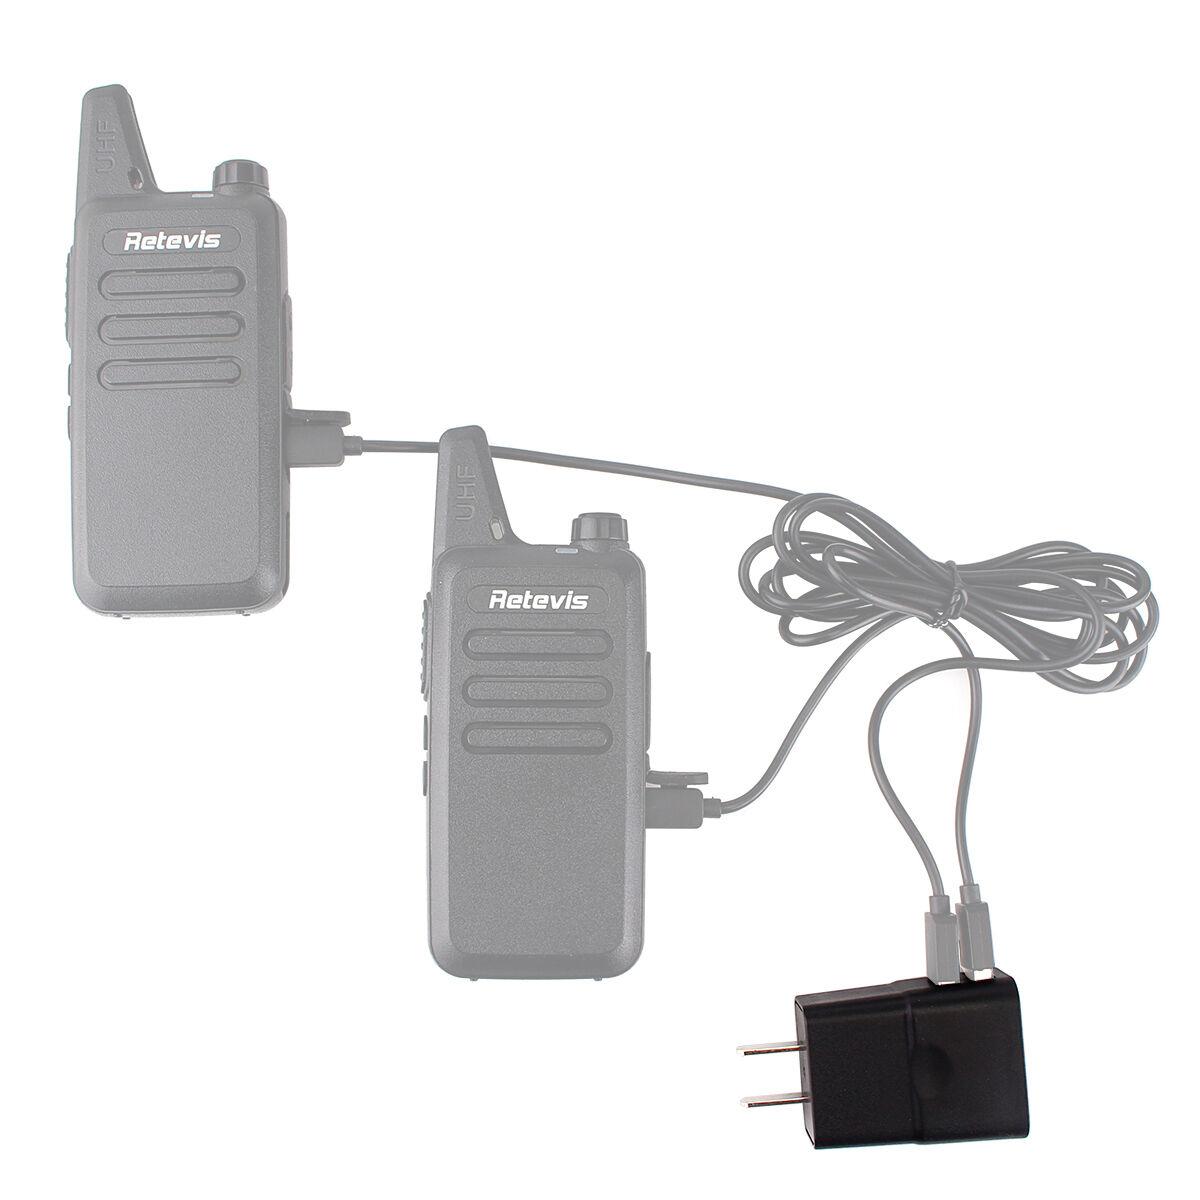 2 in 1 Power Adapter Dual USB Port DC 5V 1A for Retevis RT22